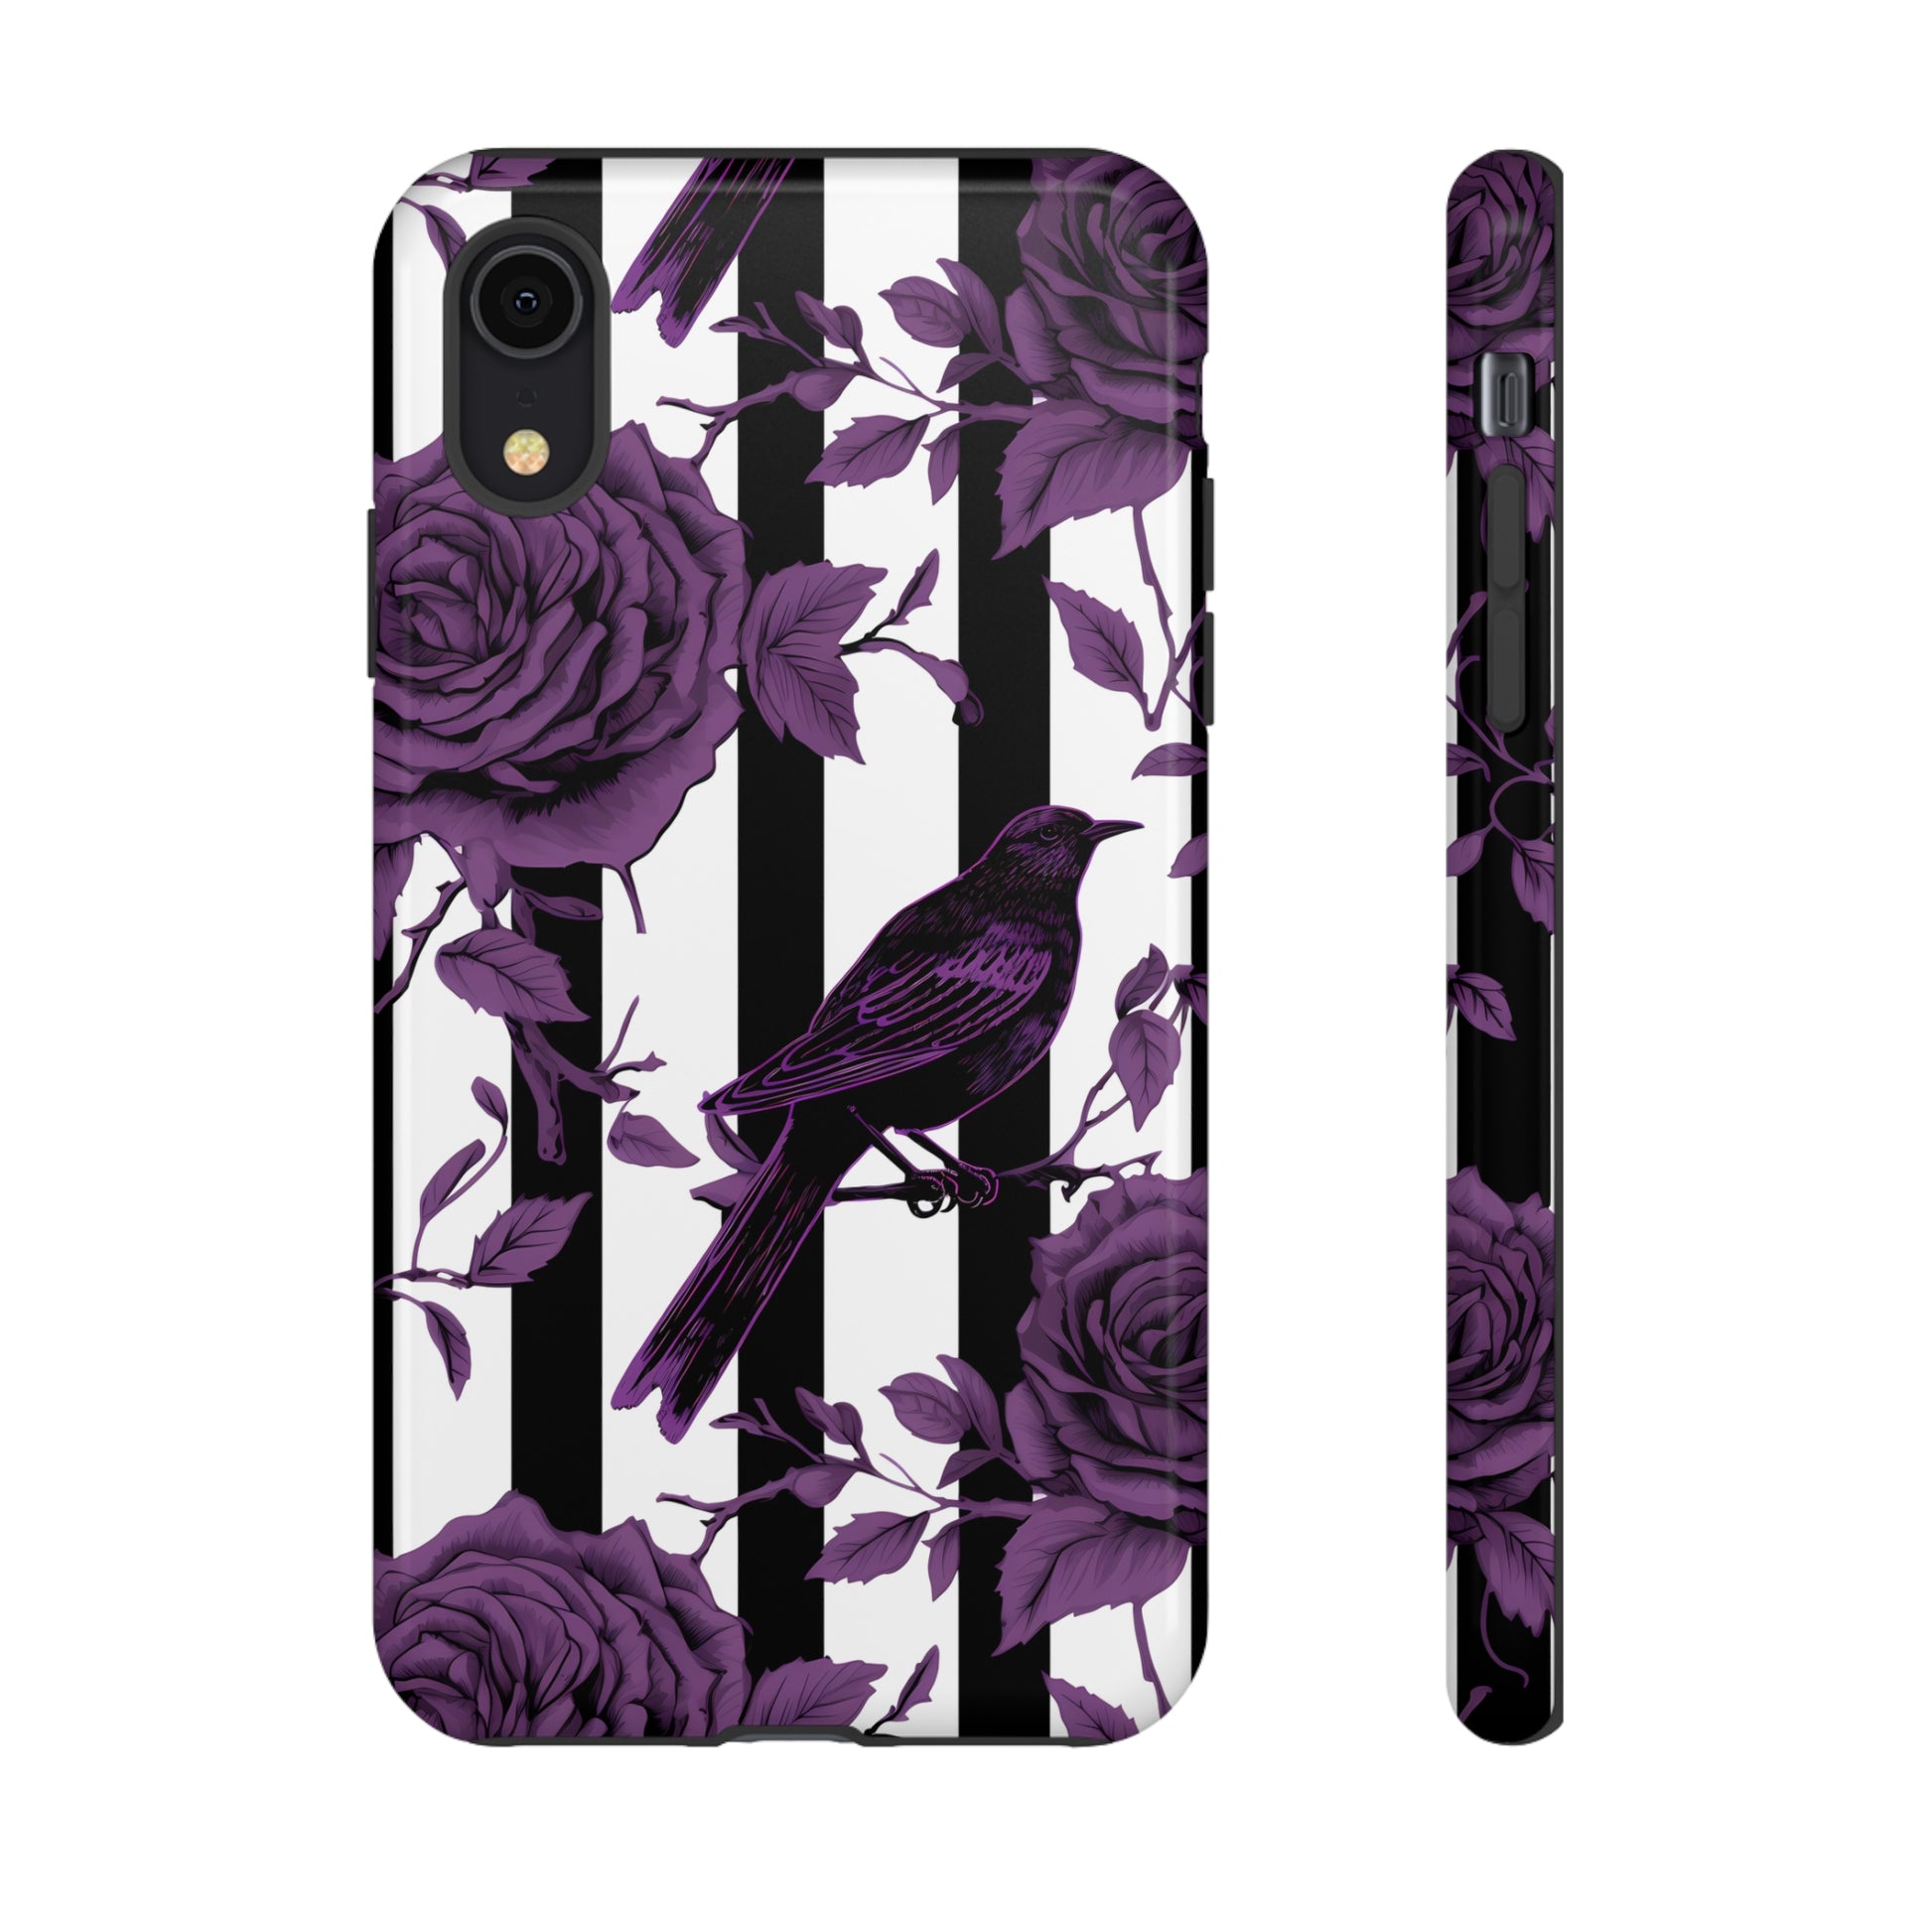 Striped Crows and Roses Tough Cases for iPhone Samsung Google PhonesPhone CaseVTZdesignsiPhone XRGlossyAccessoriescrowsGlossy